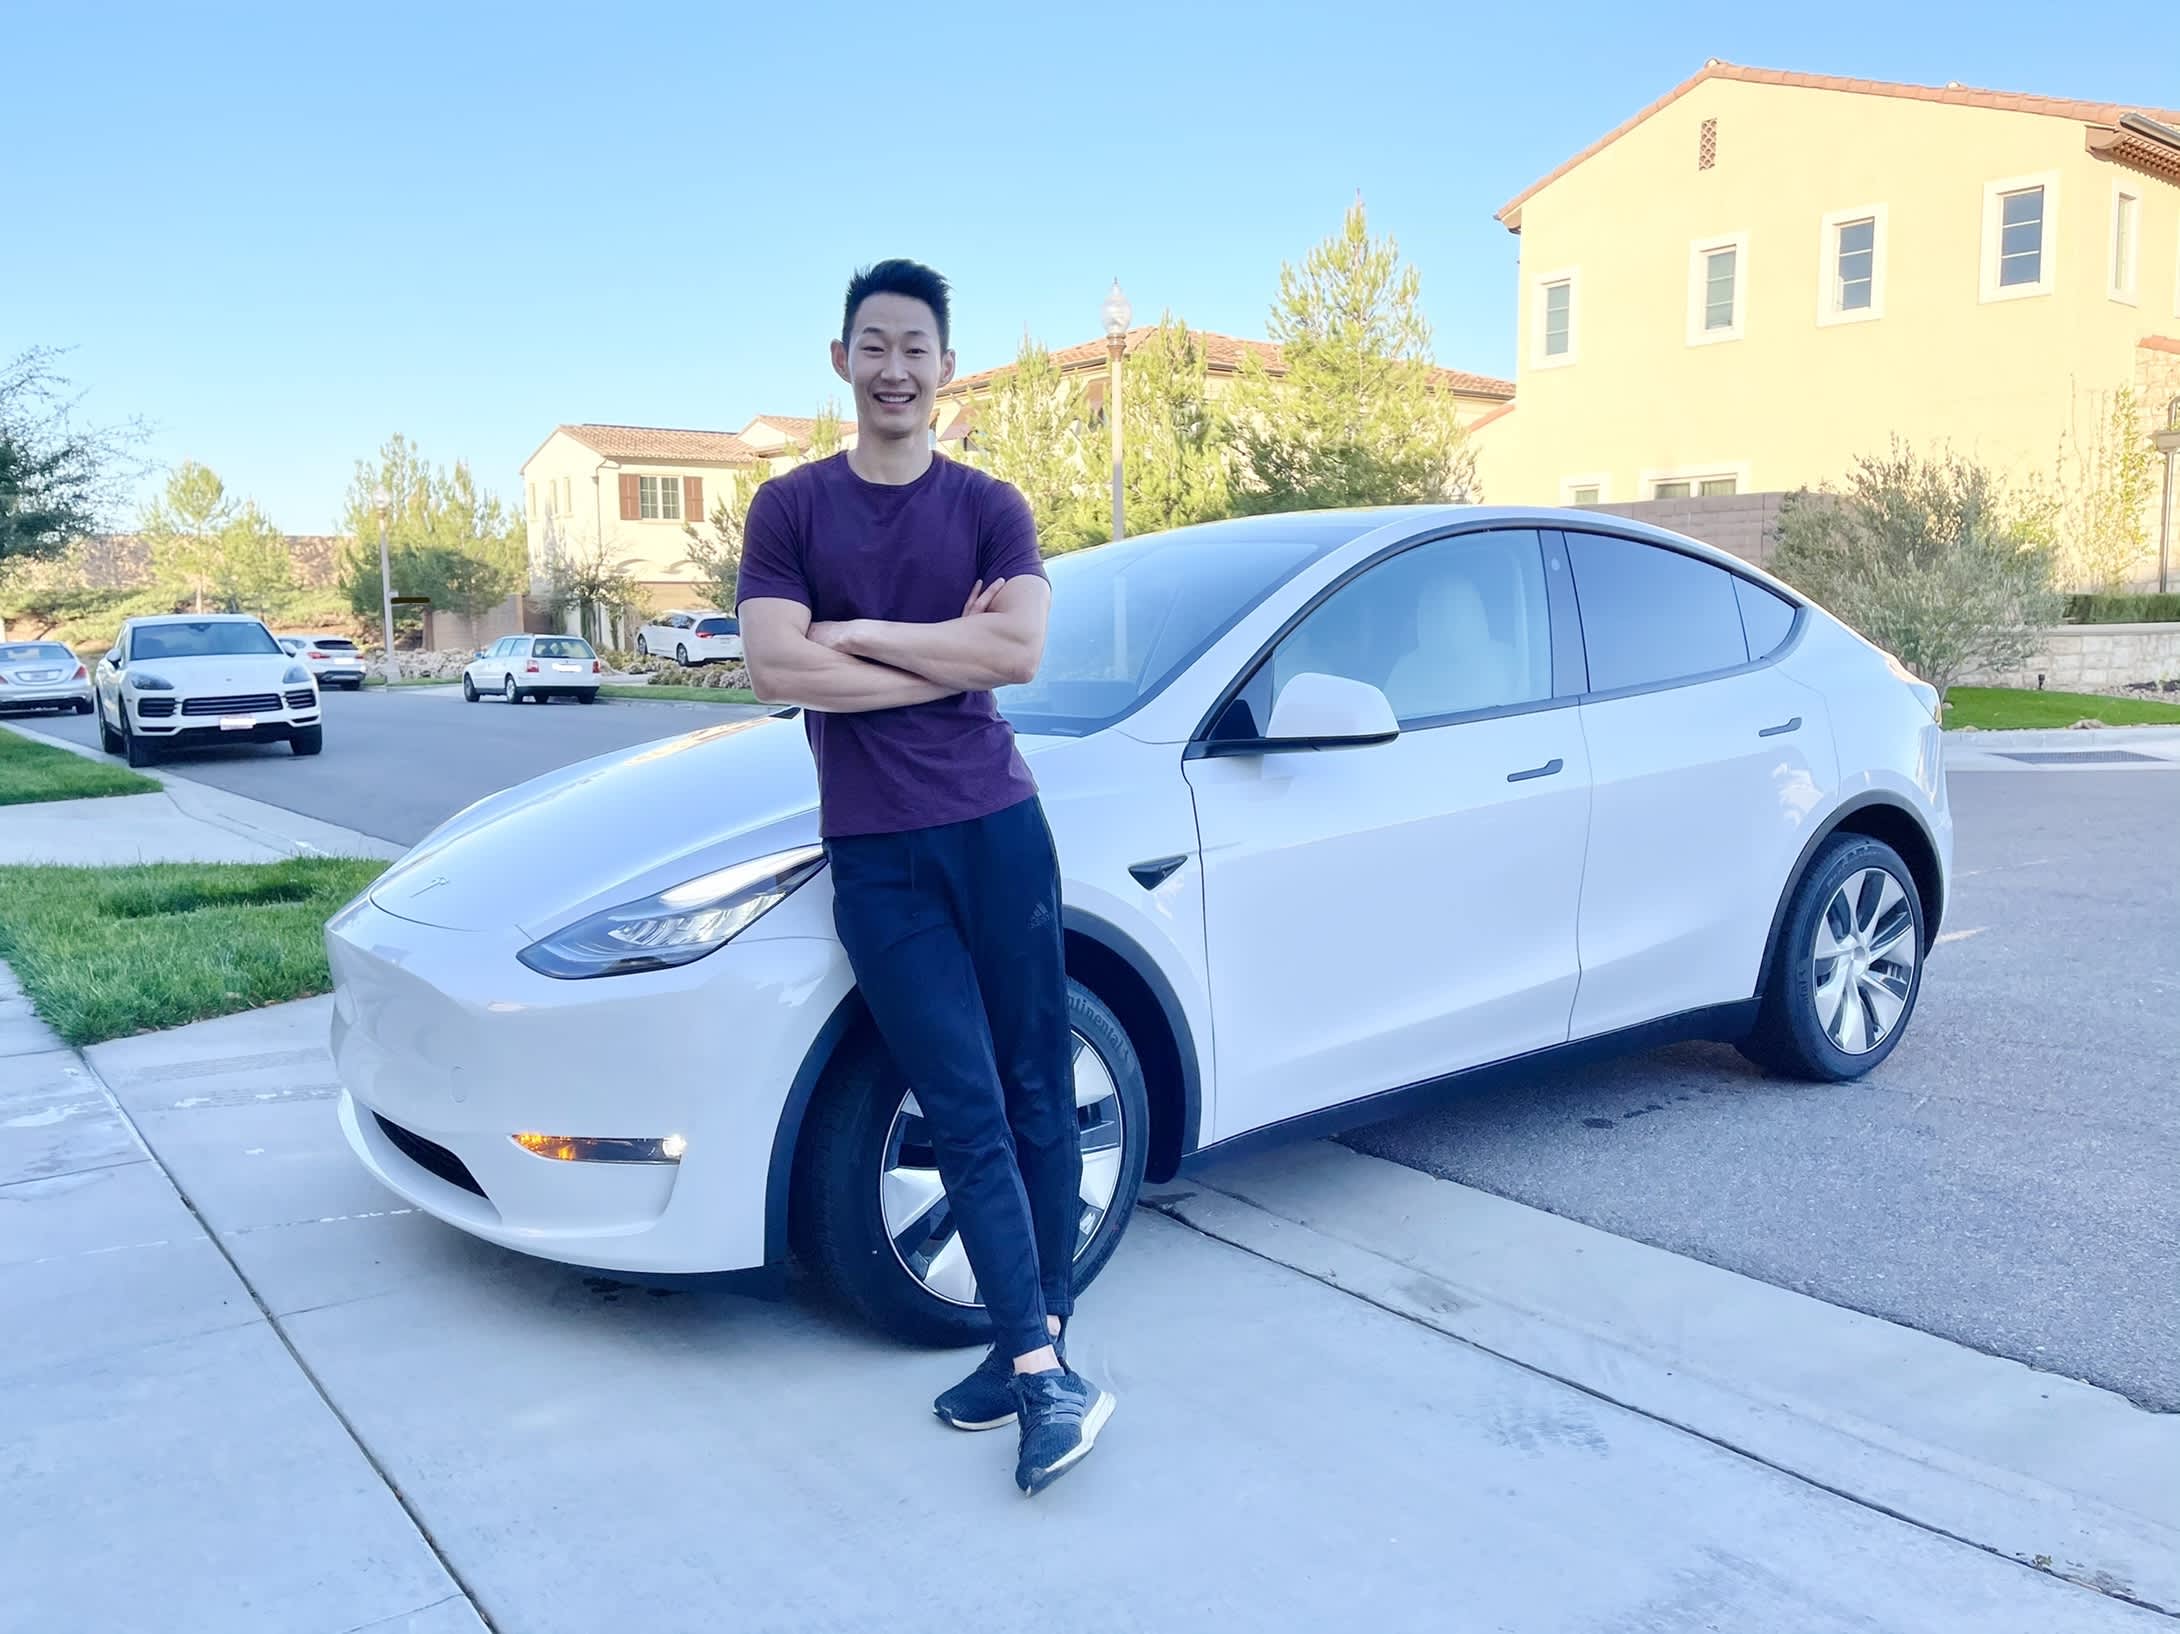 A Positive Experience with Tesla: Improving Customer Relations with the Home Depot Model for Delivery Advisors